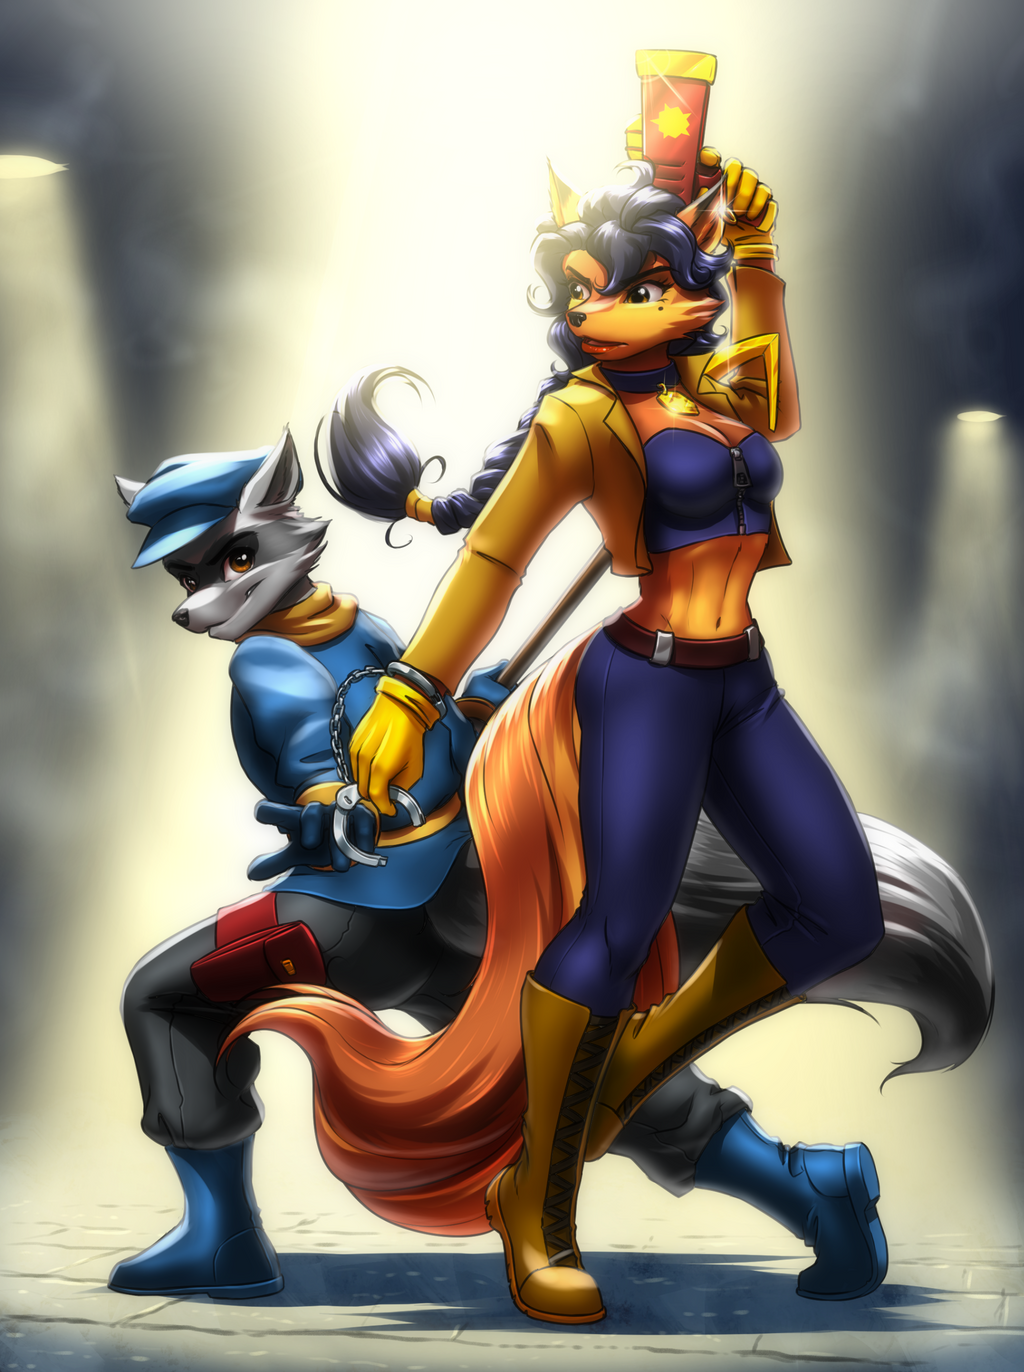 catch_me_if_you_can__by_mykegreywolf-dal4w18.png